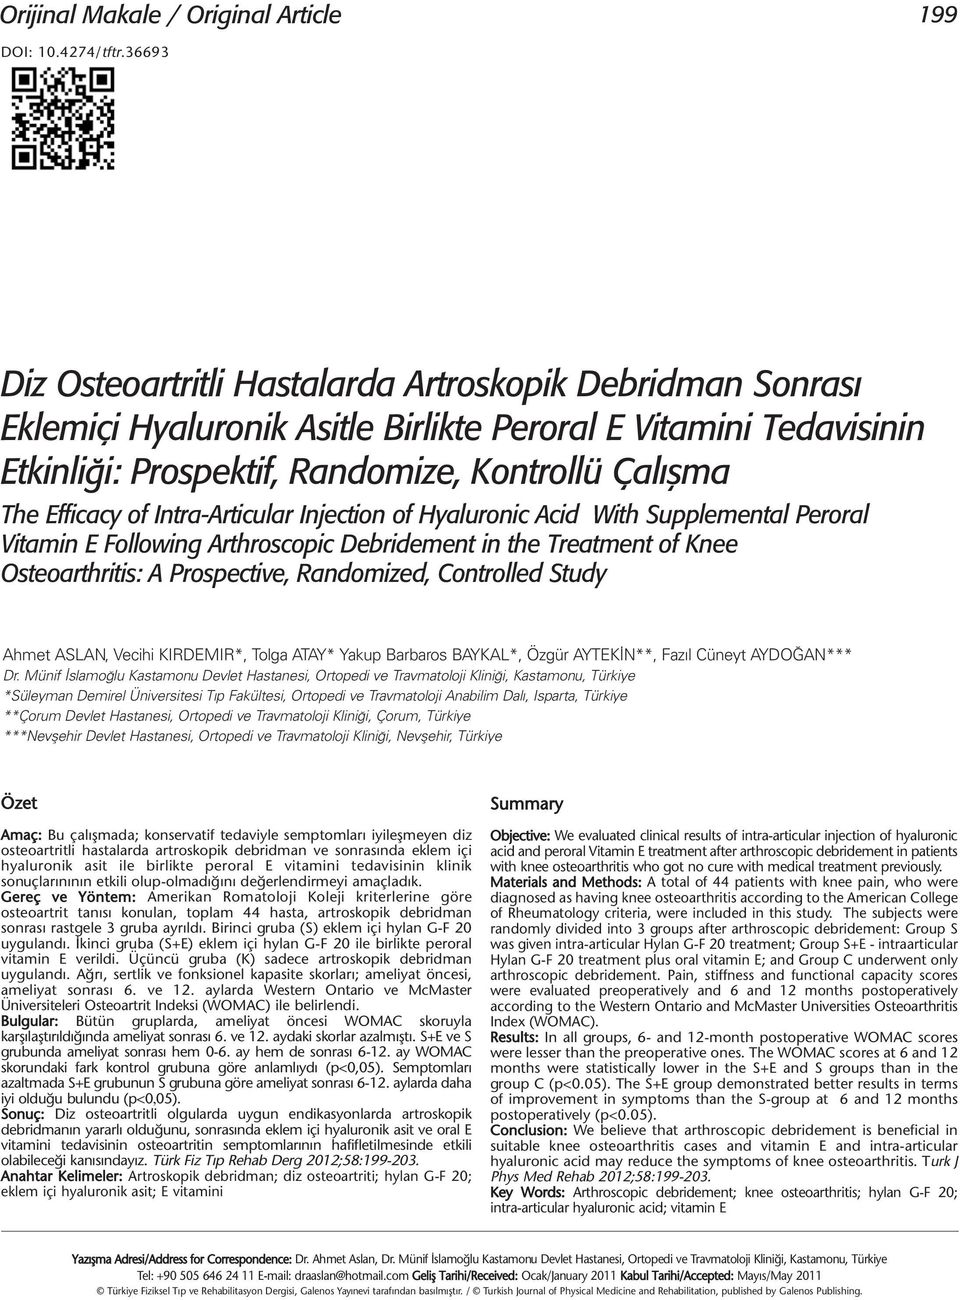 Intra-Articular Injection of Hyaluronic Acid With Supplemental Peroral Vitamin E Following Arthroscopic Debridement in the Treatment of Knee Osteoarthritis: A Prospective, Randomized, Controlled